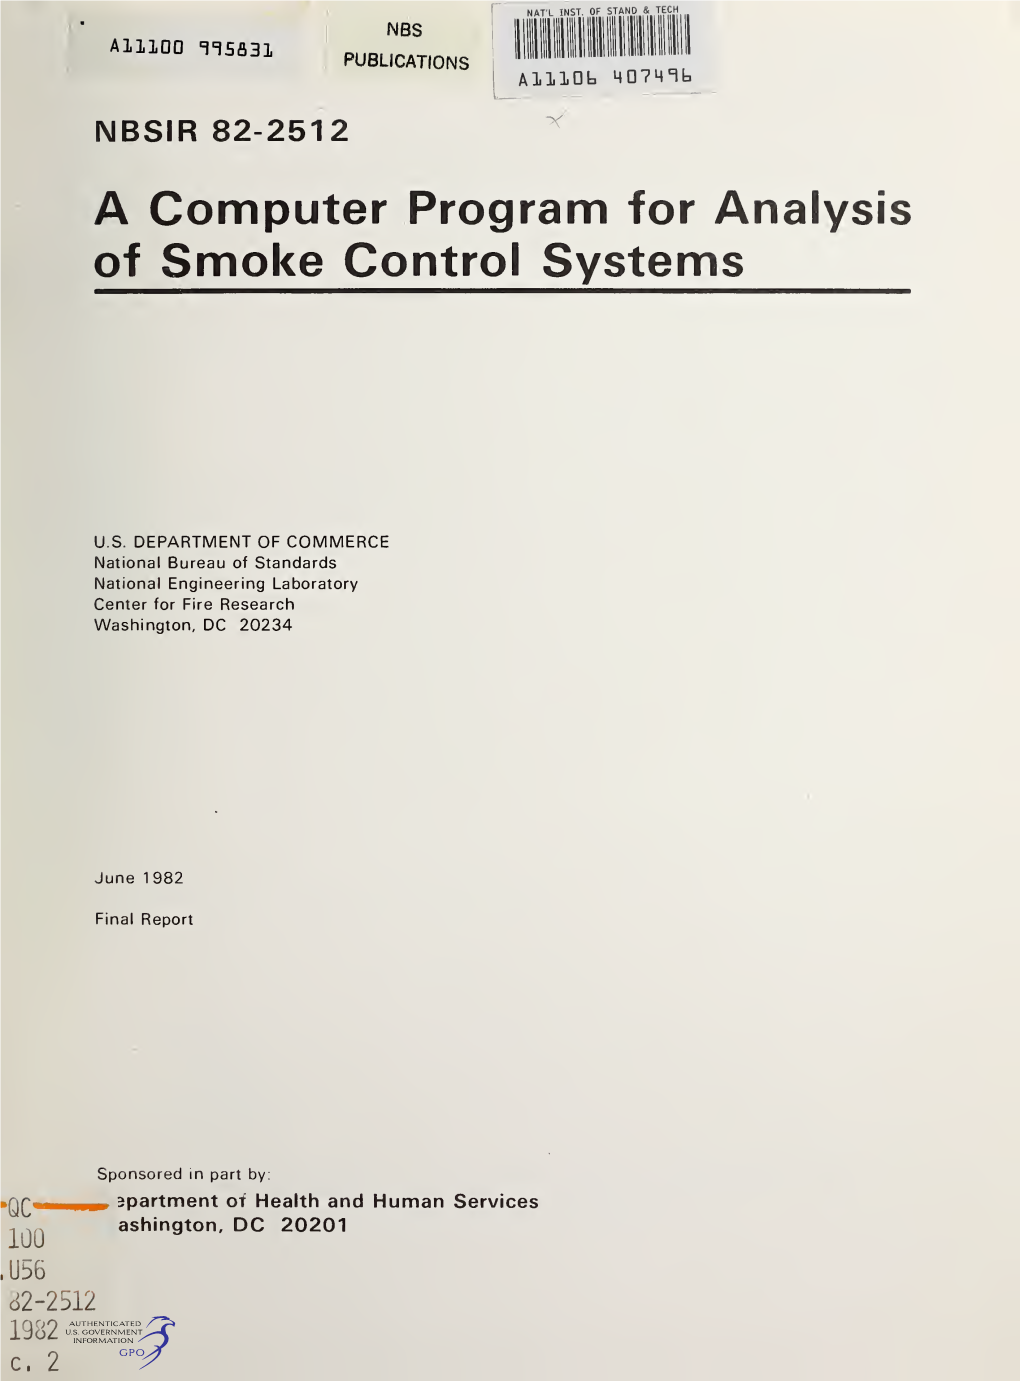 A Computer Program for Analysis of Smoke Control Systems